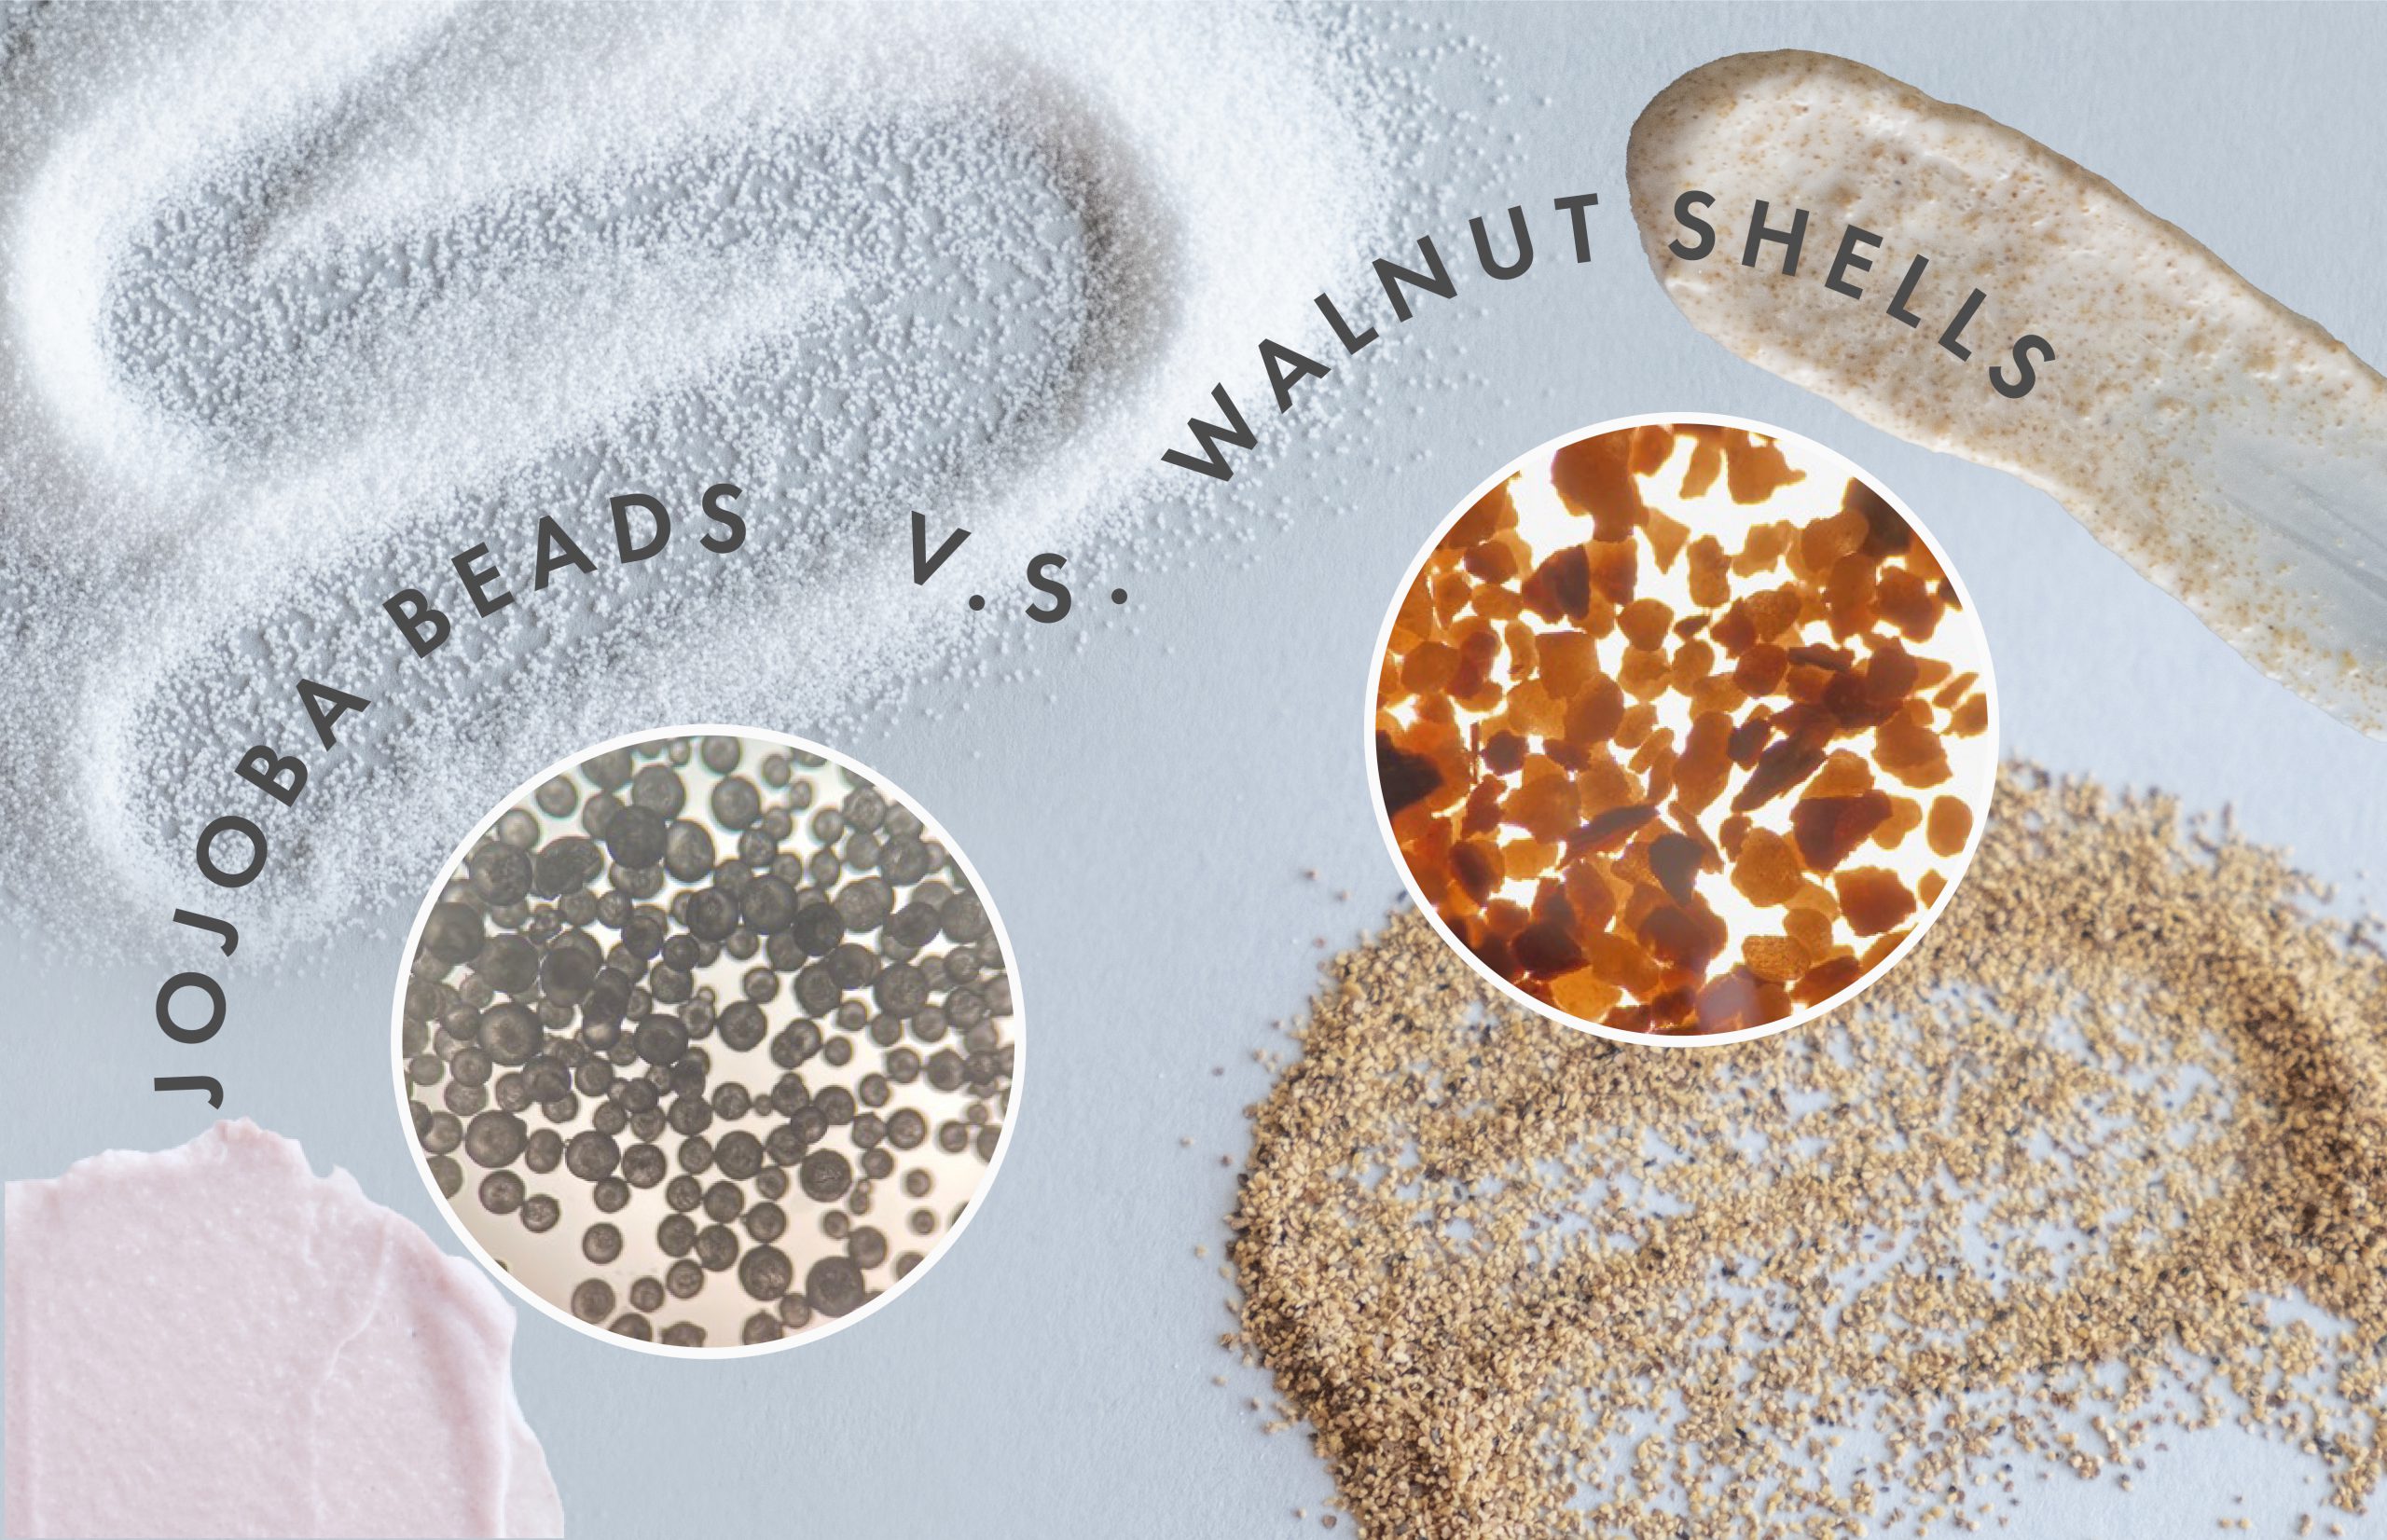 Jojoba Beads Are the Most Skin-Friendly Ingredient for Facial Scrubs